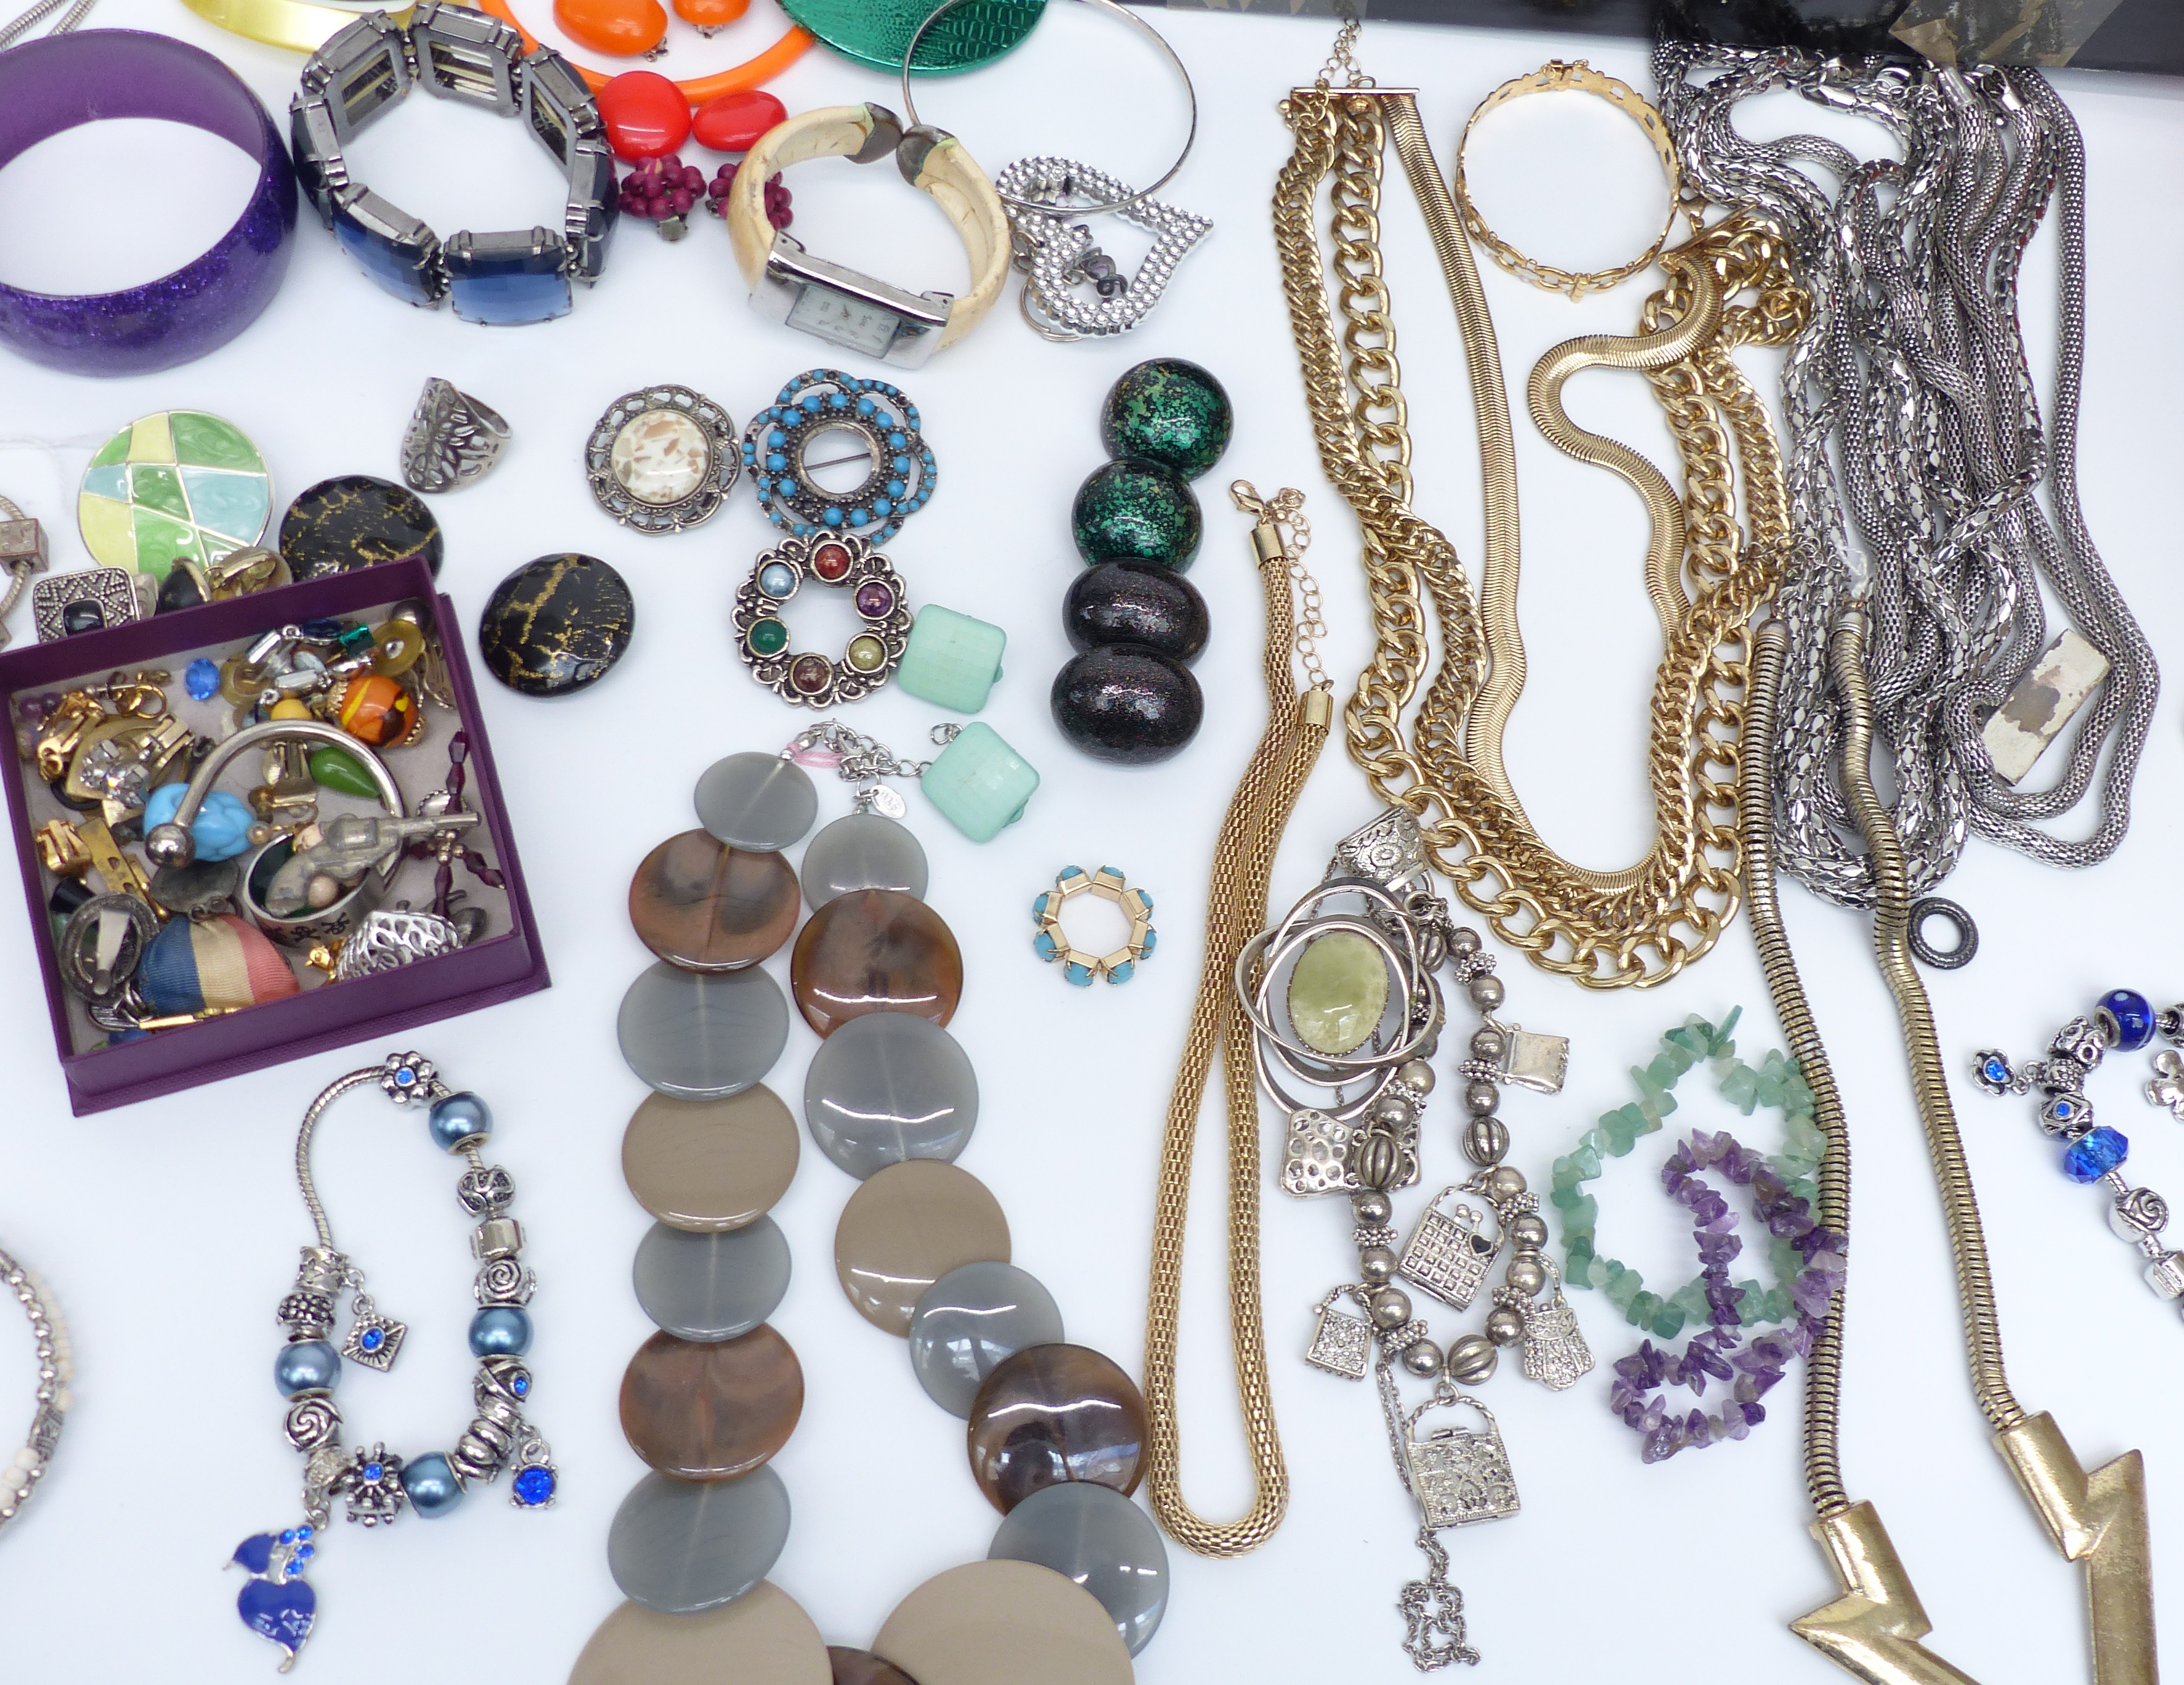 A collection of costume jewellery including necklaces, bracelets, etc - Image 3 of 3